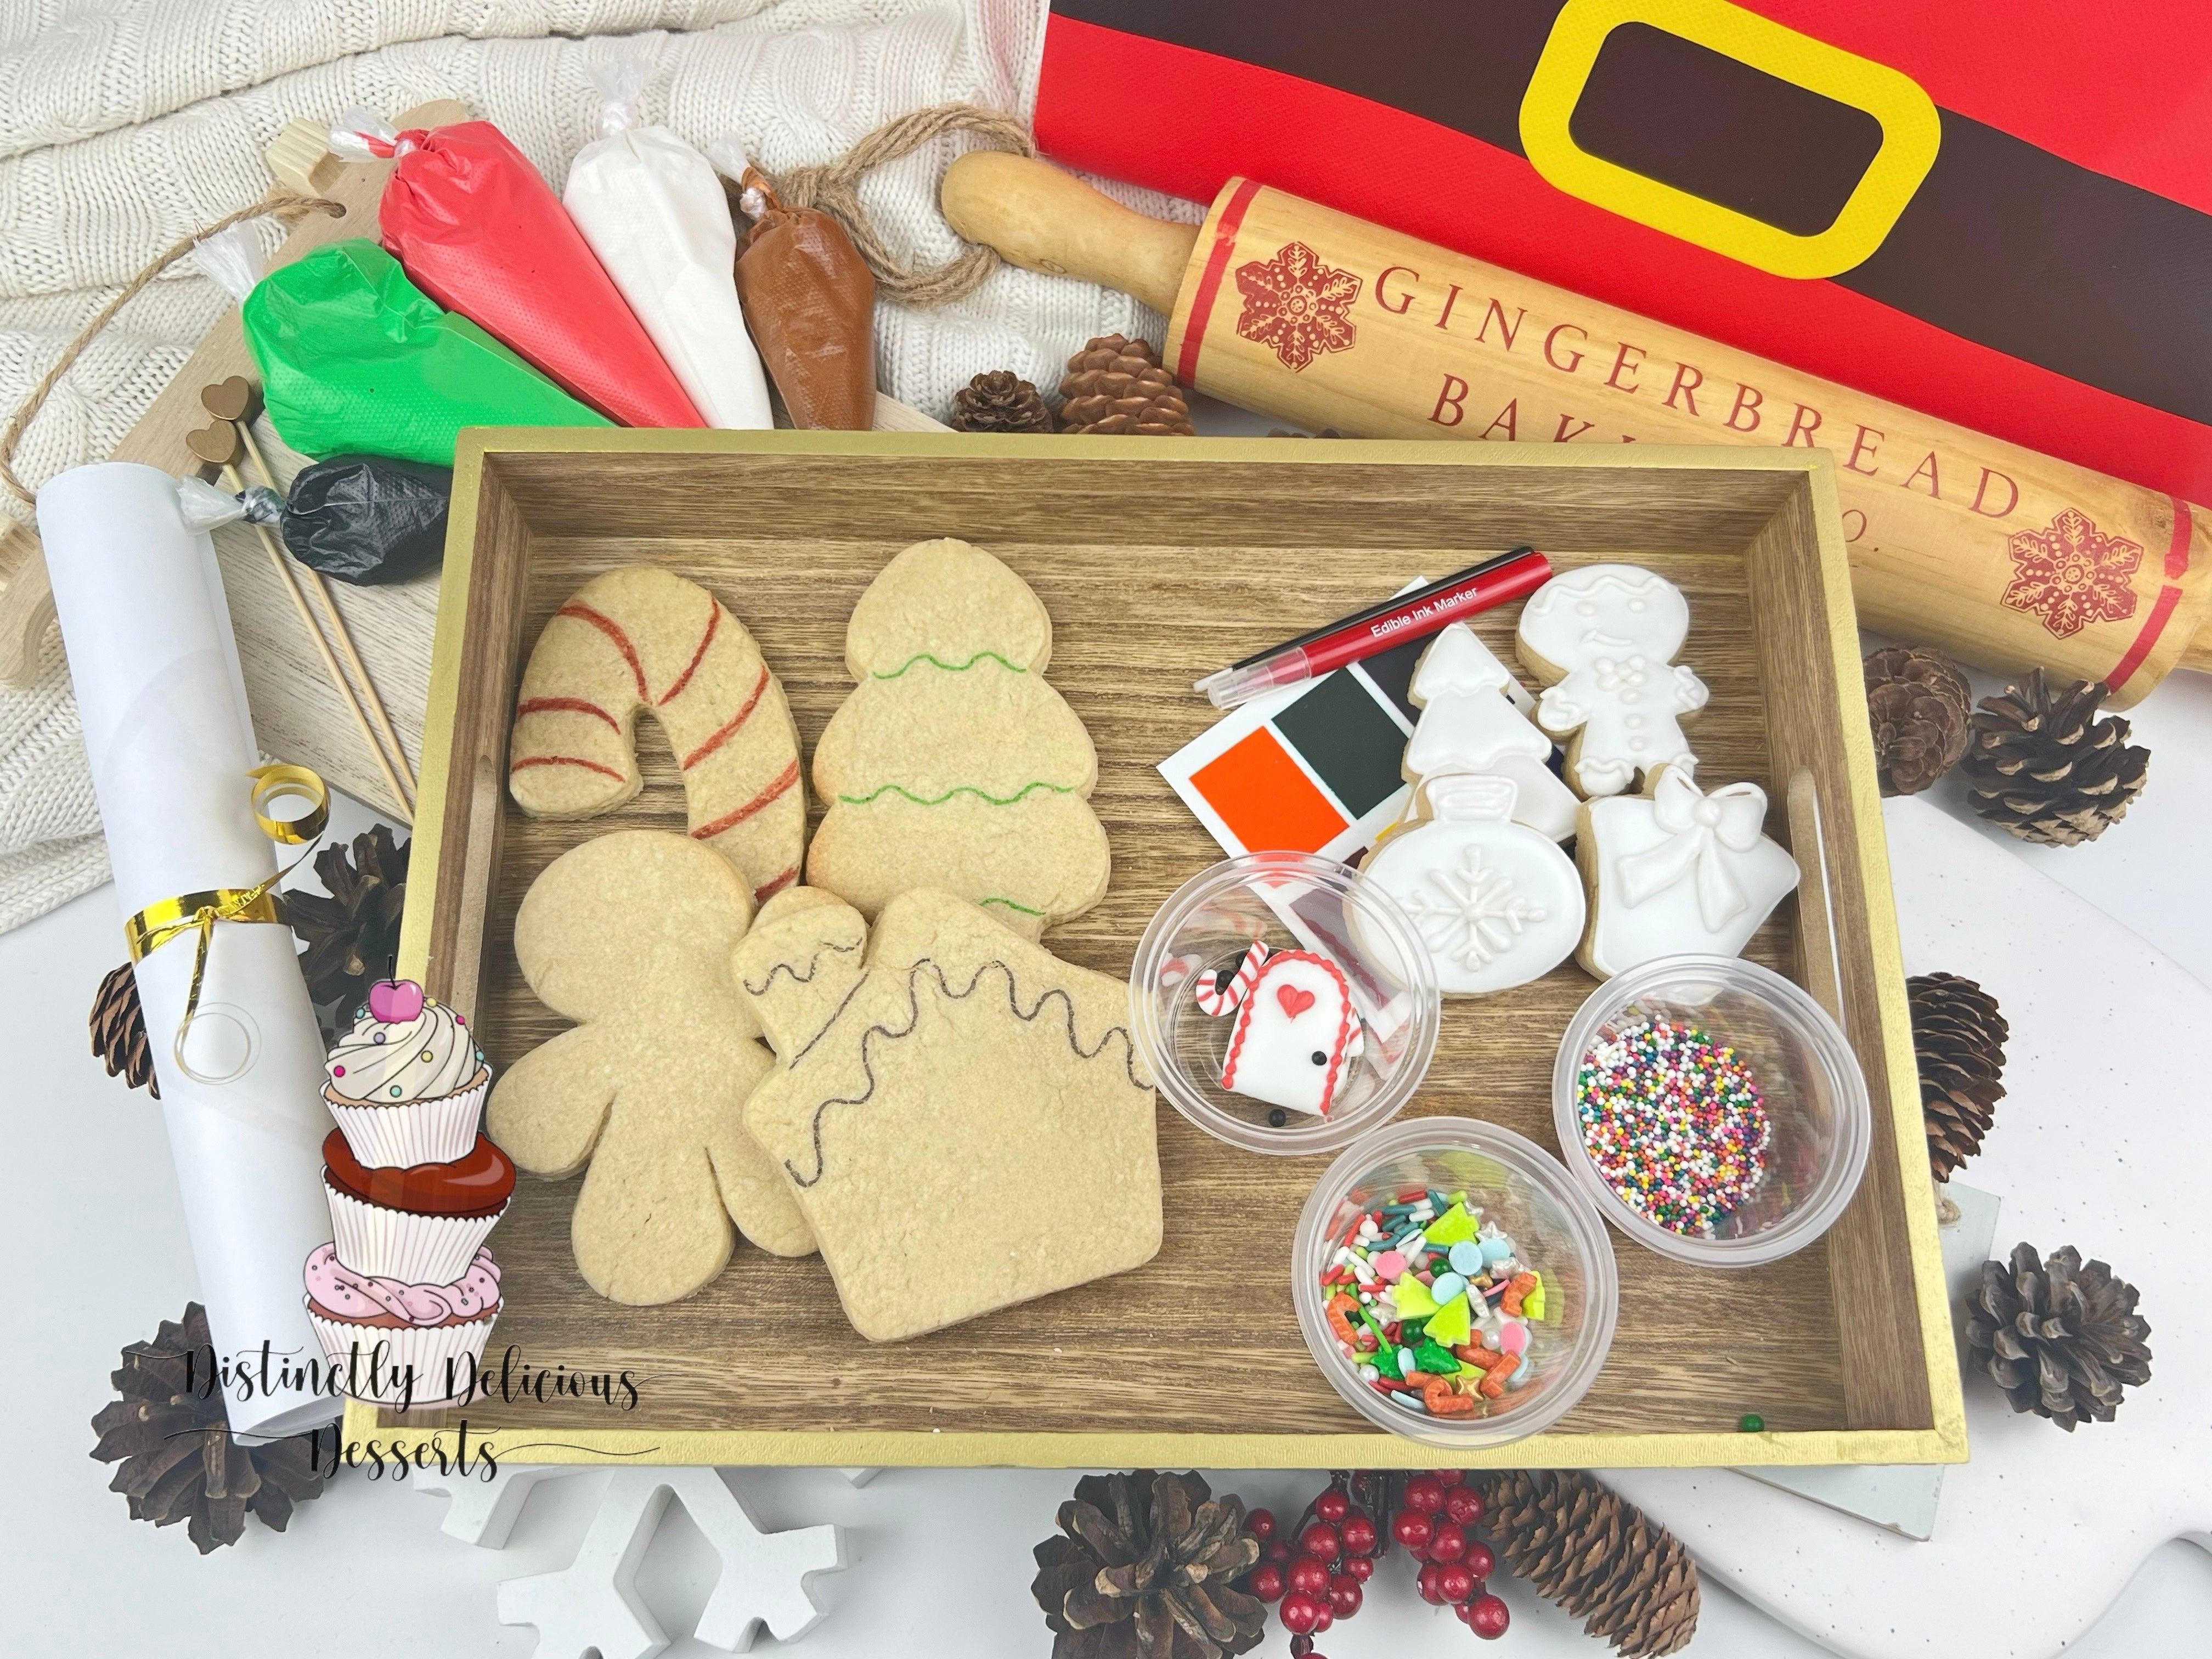 Kids December Cookie Class Experience DIY Kit - Available from 12/9 - 12/24